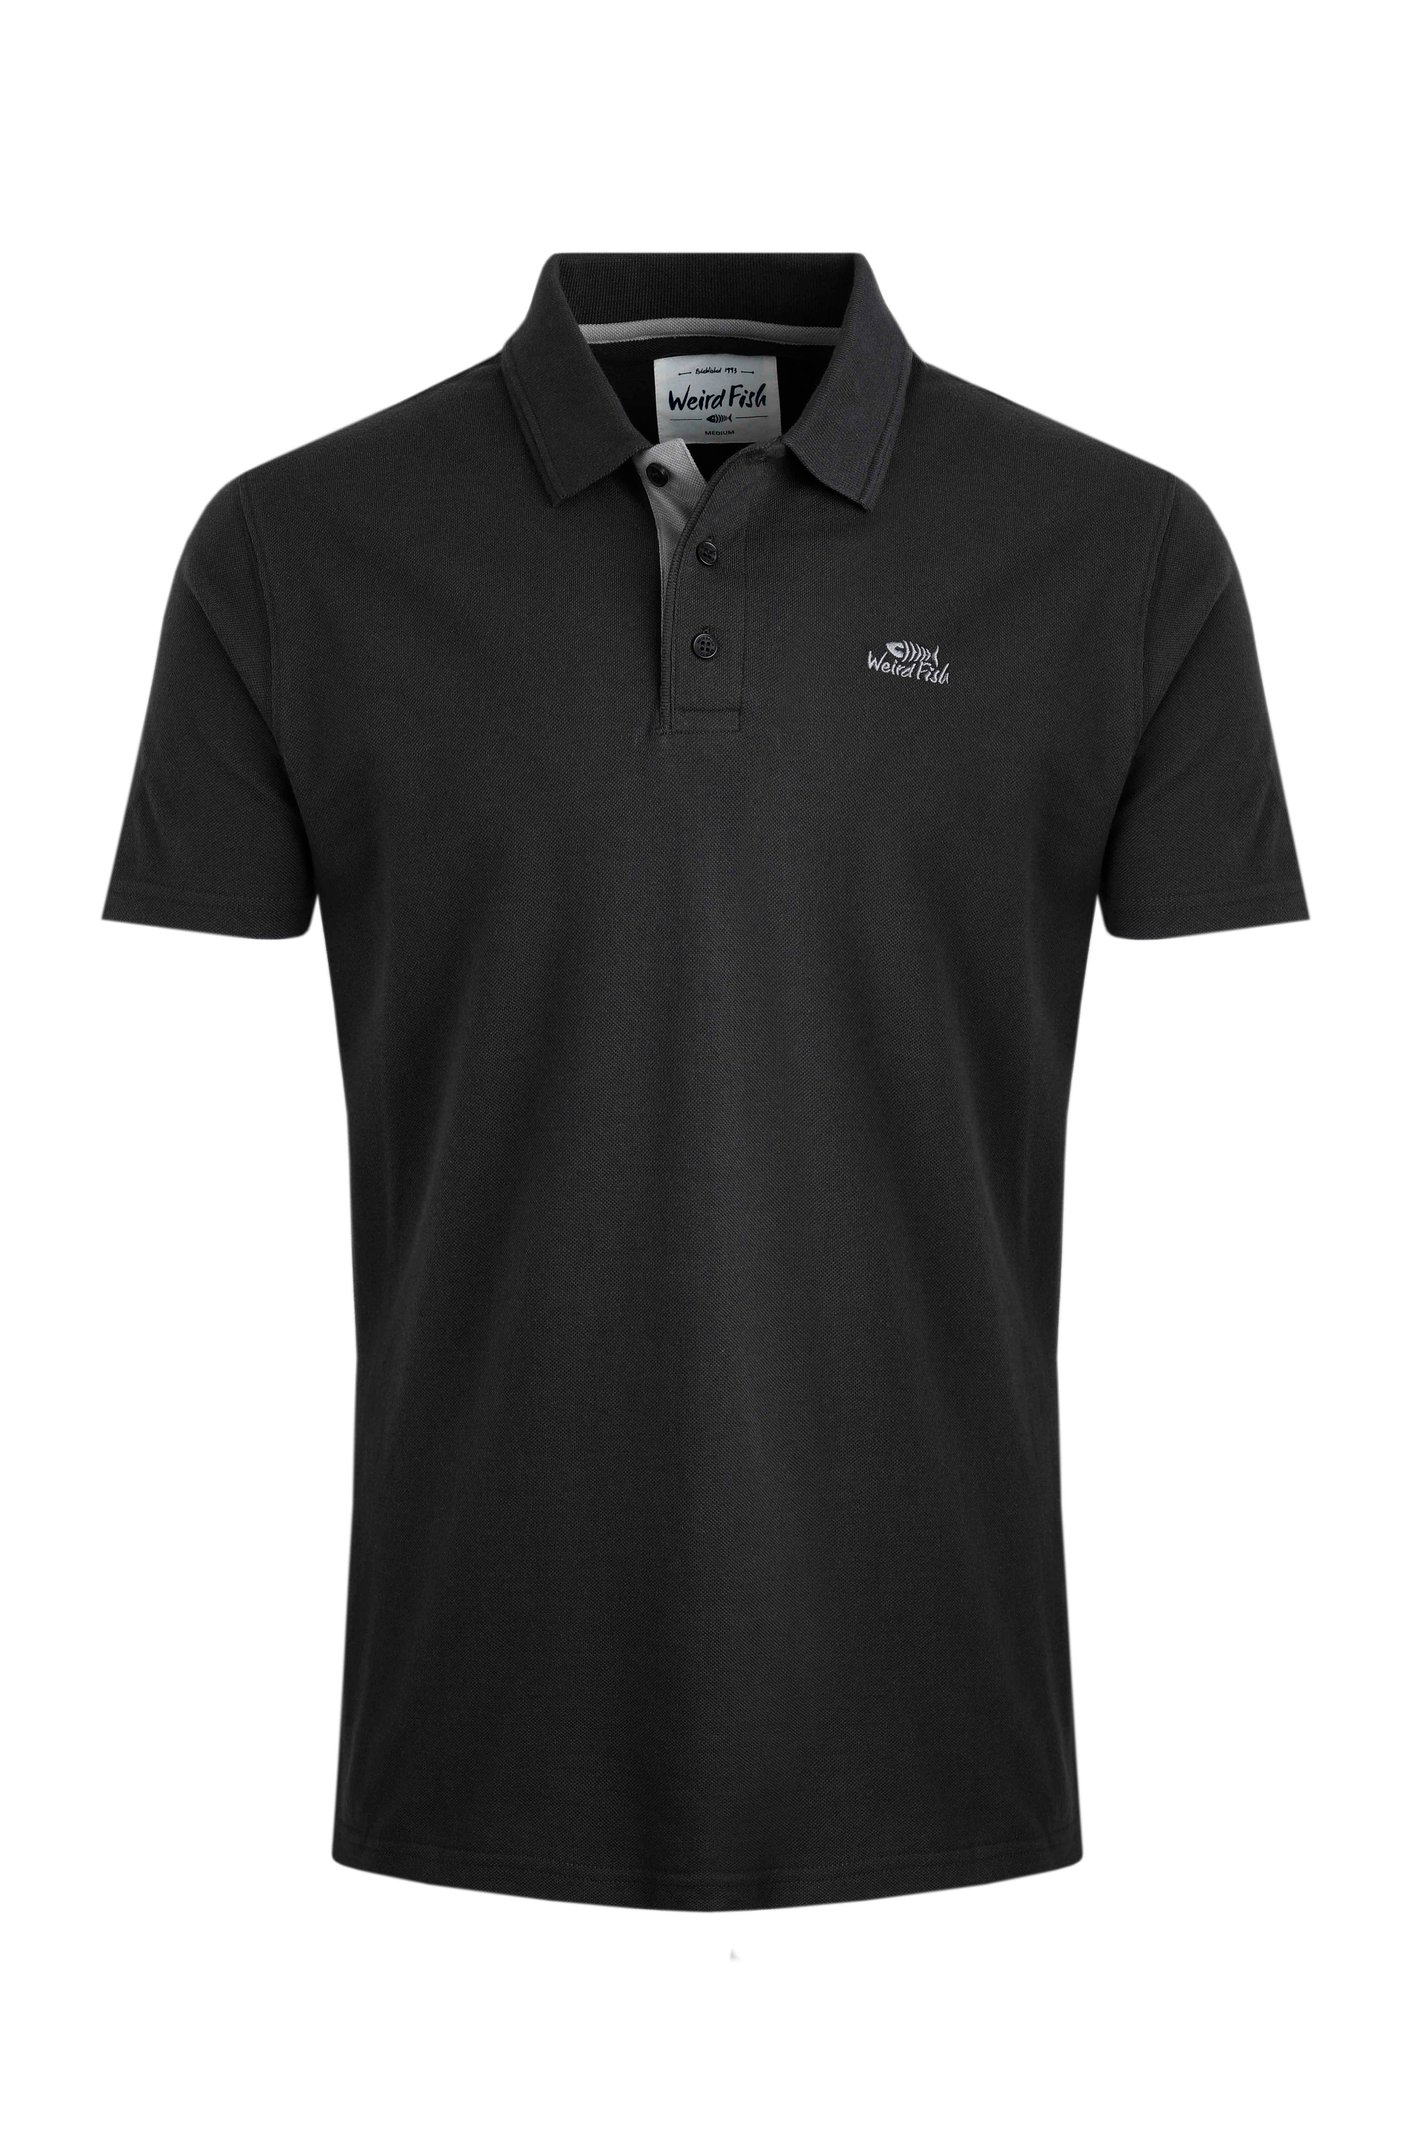 Weird Fish Miles Organic Pique Polo Washed Black Size 4XL